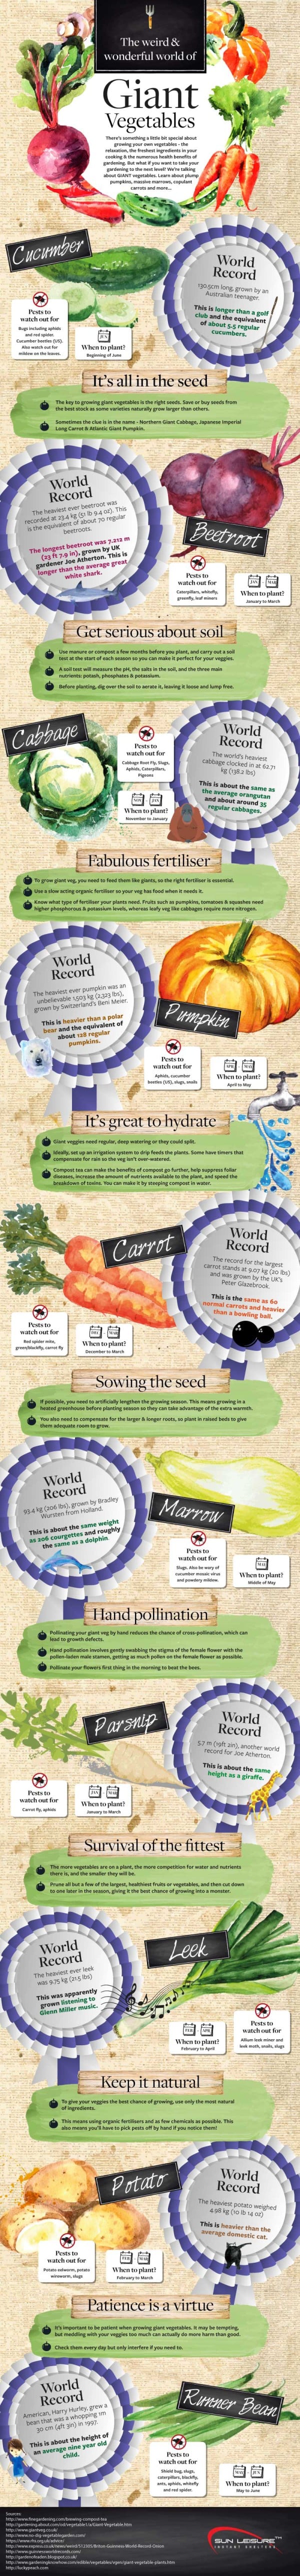 Tips for growing giant vegetables, plus a listing of 10 current world record holding vegetables. You won't believe how big these veggies can get!